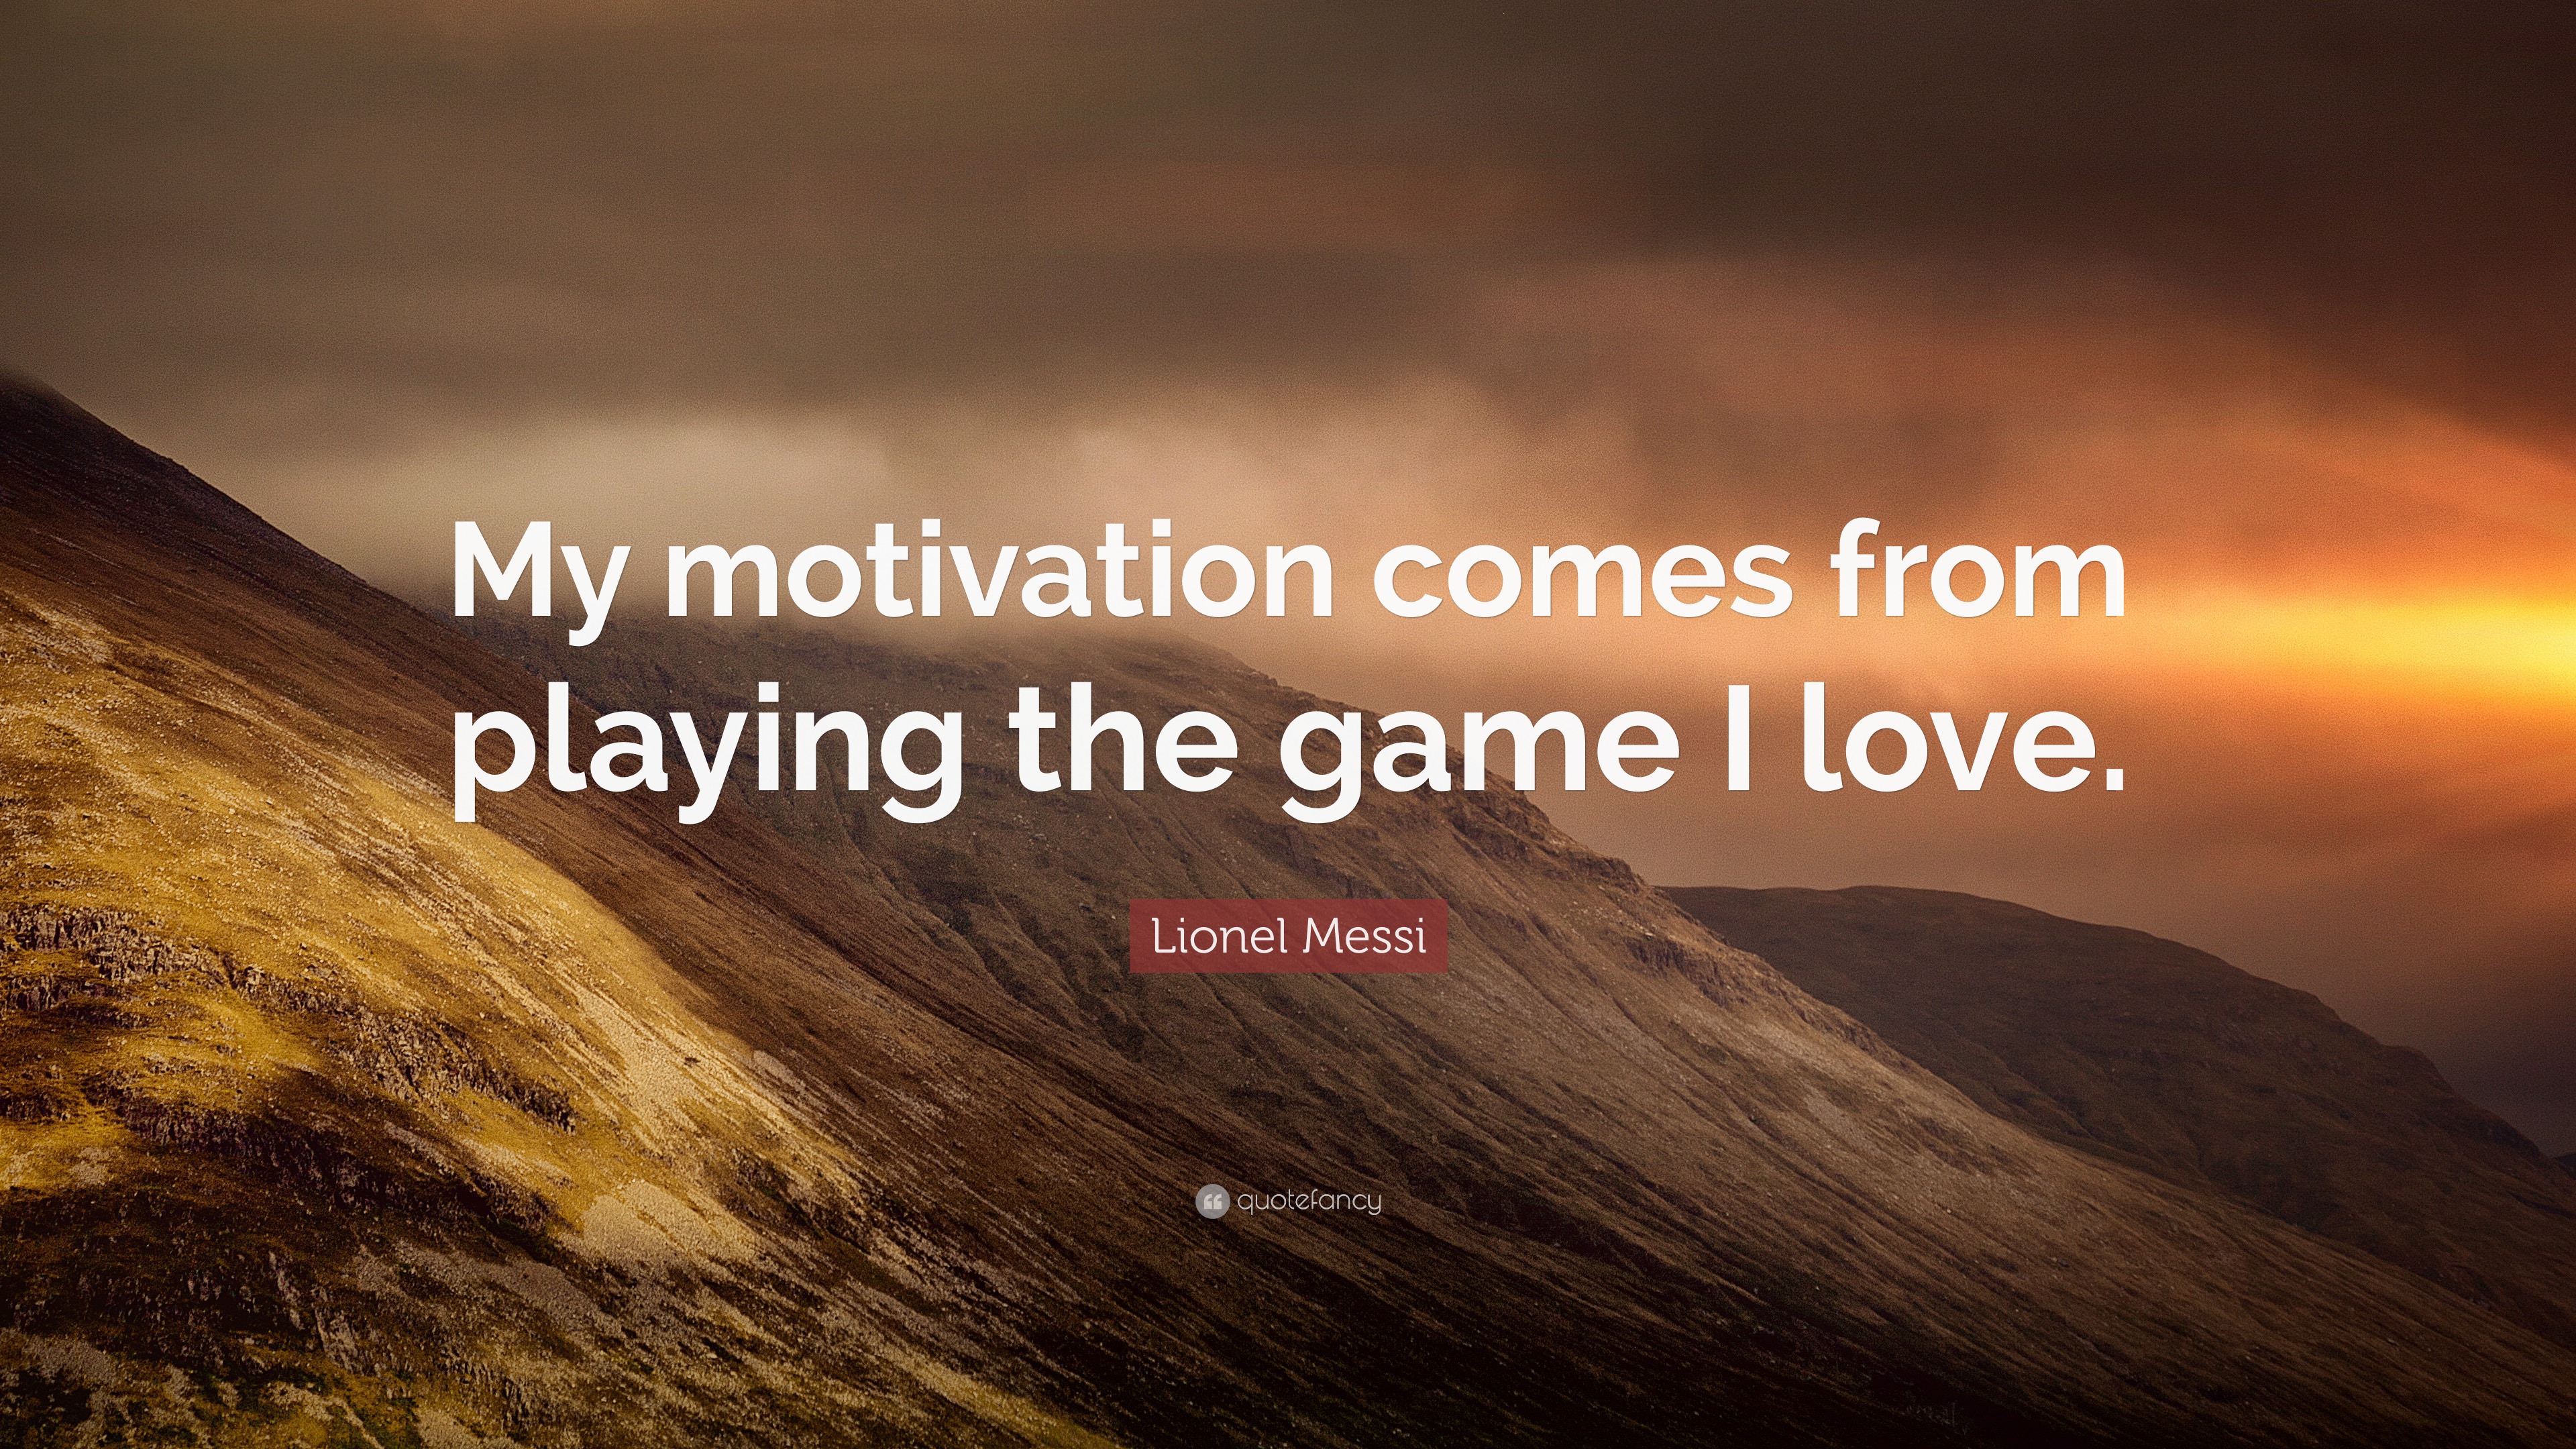 Lionel Messi Quote: “My motivation comes from playing the game I love.”